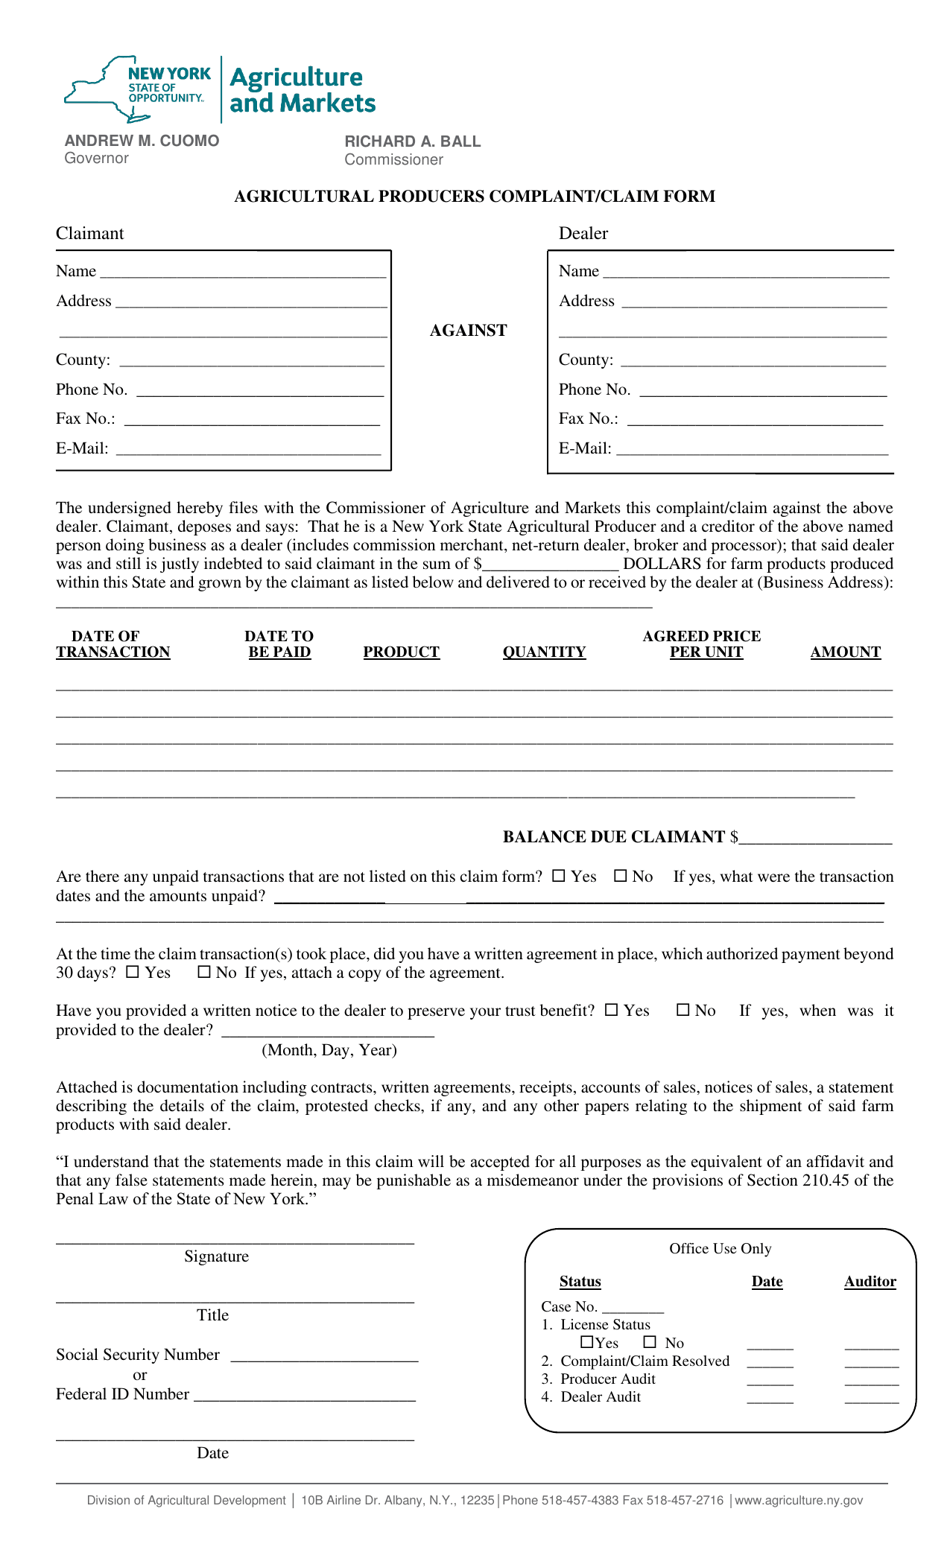 Agricultural Producers Complaint / Claim Form - New York, Page 1